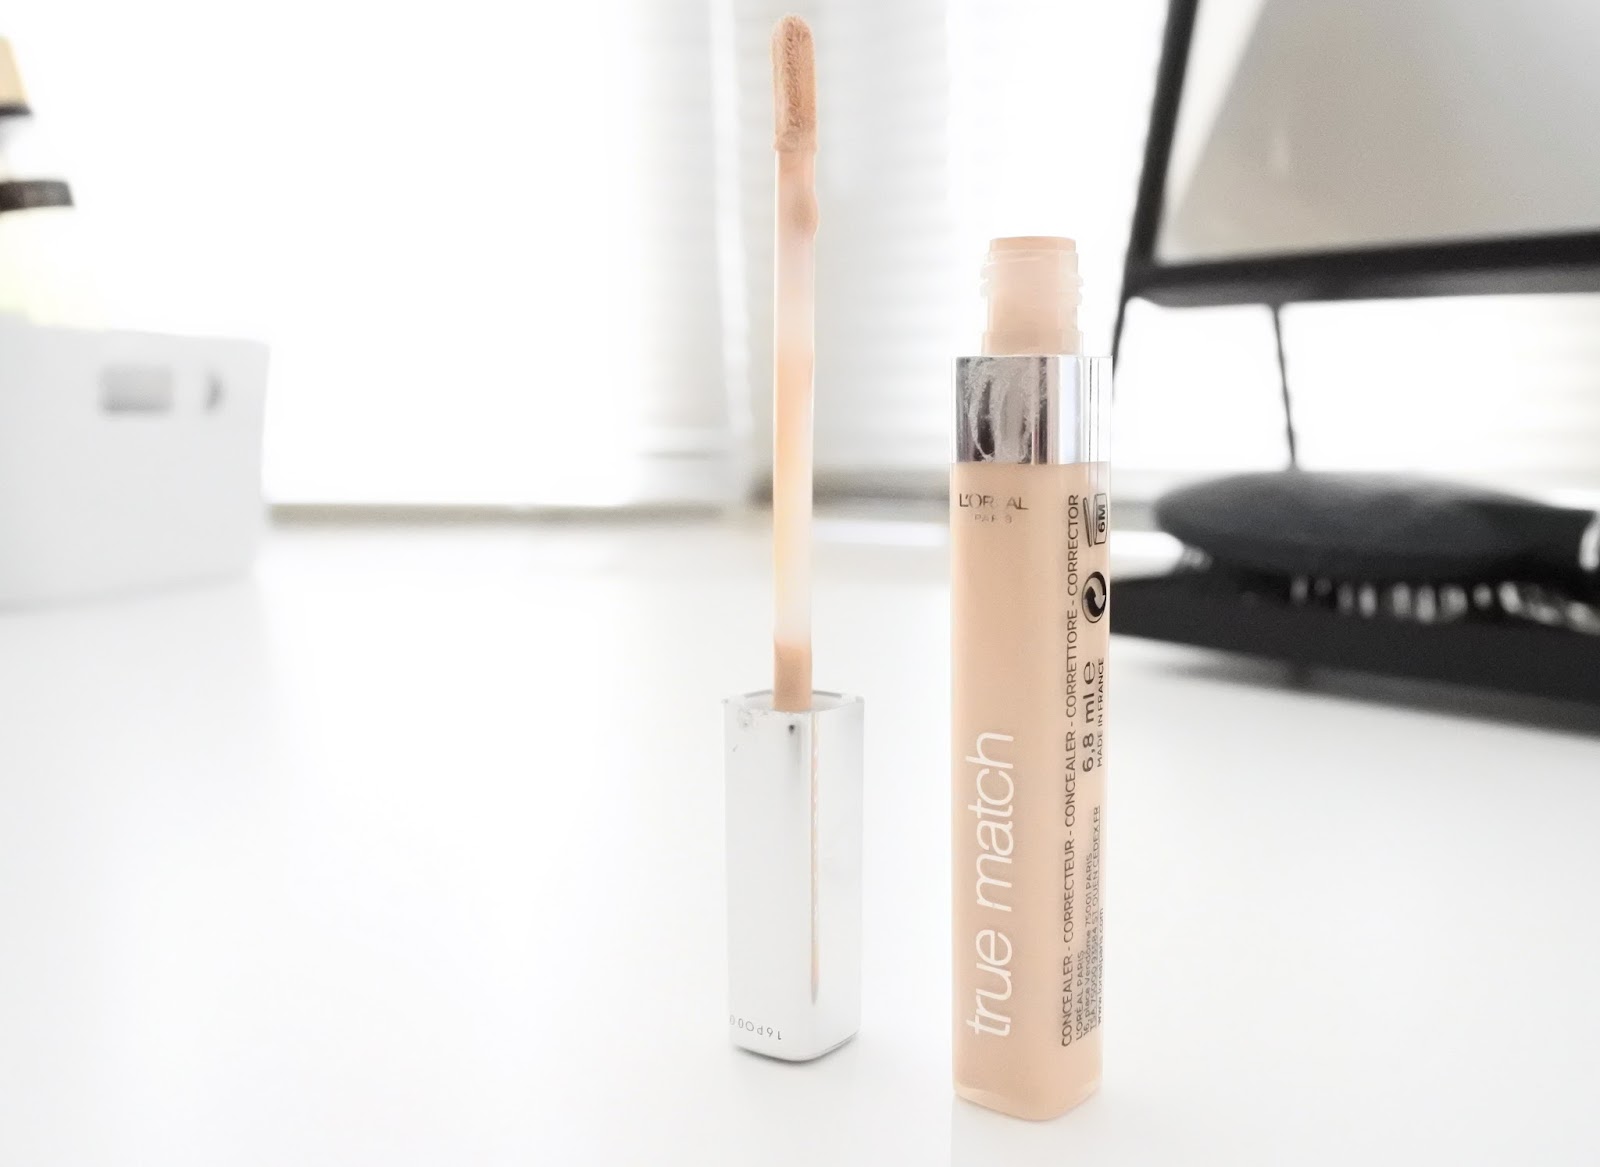 L'Oreal True Match Concealer - Only Shelley